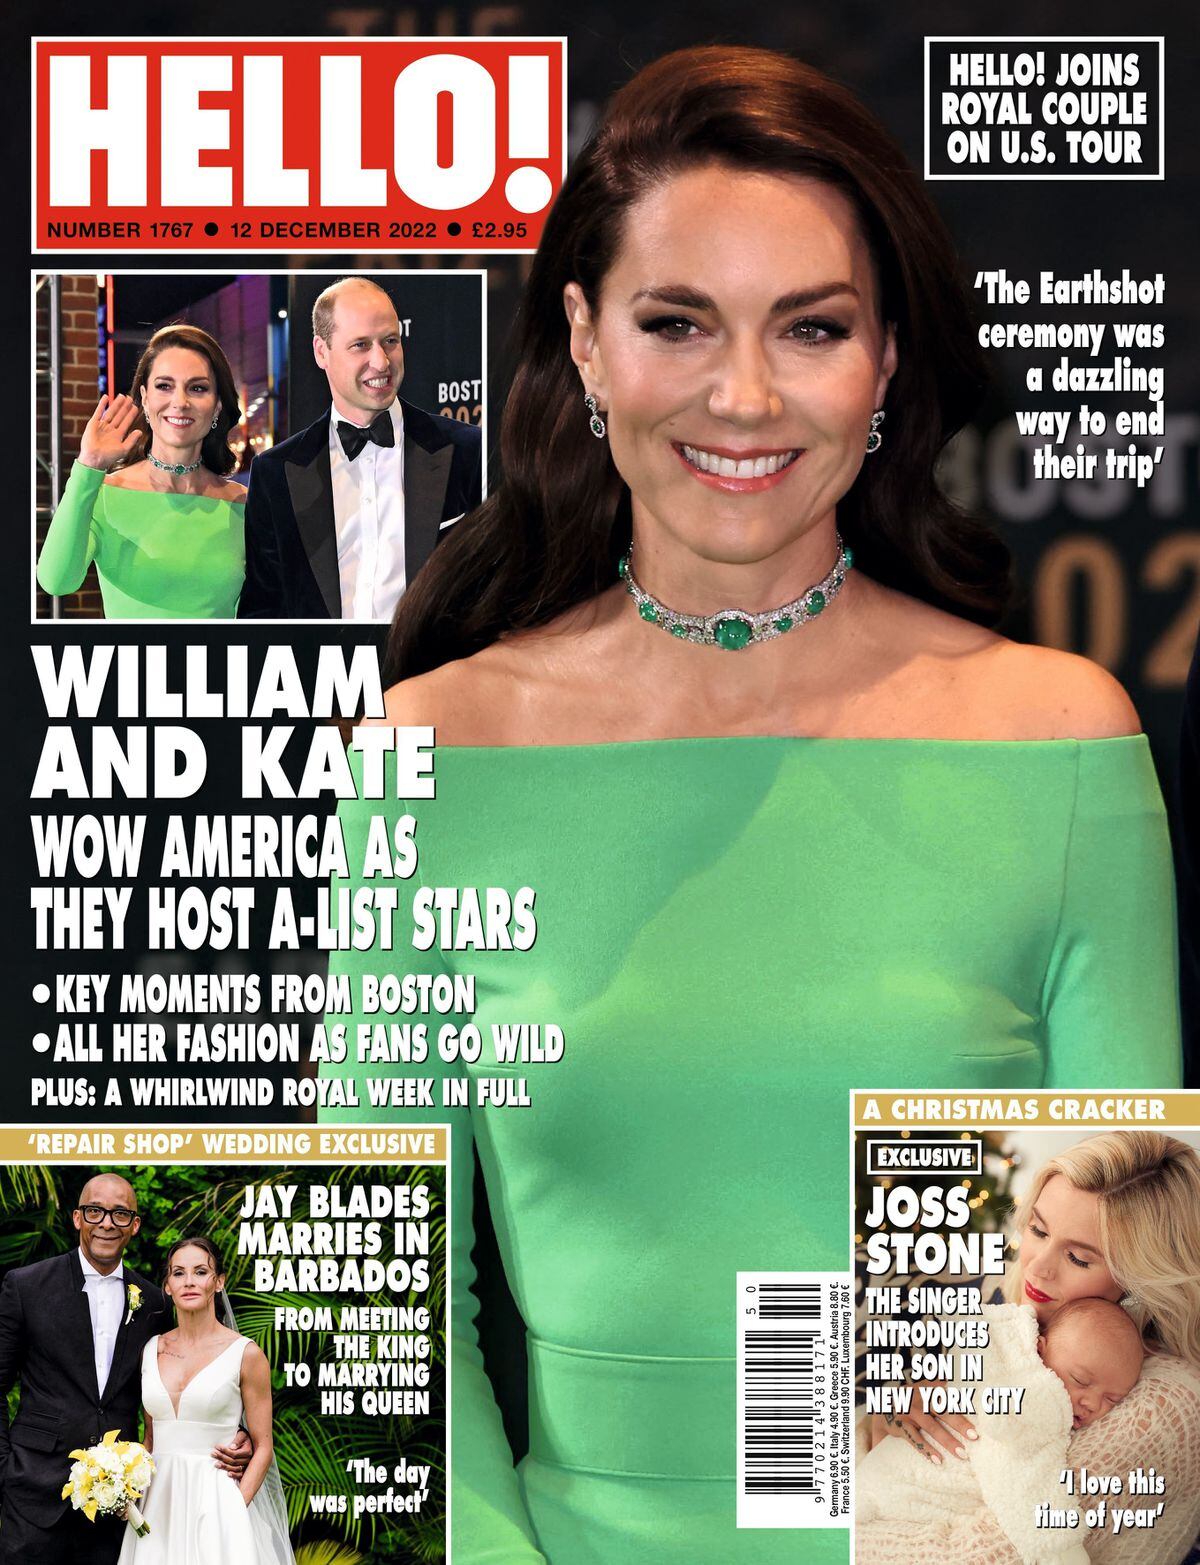 The latest edition of Hello! magazine has the happy coupl e on its front page